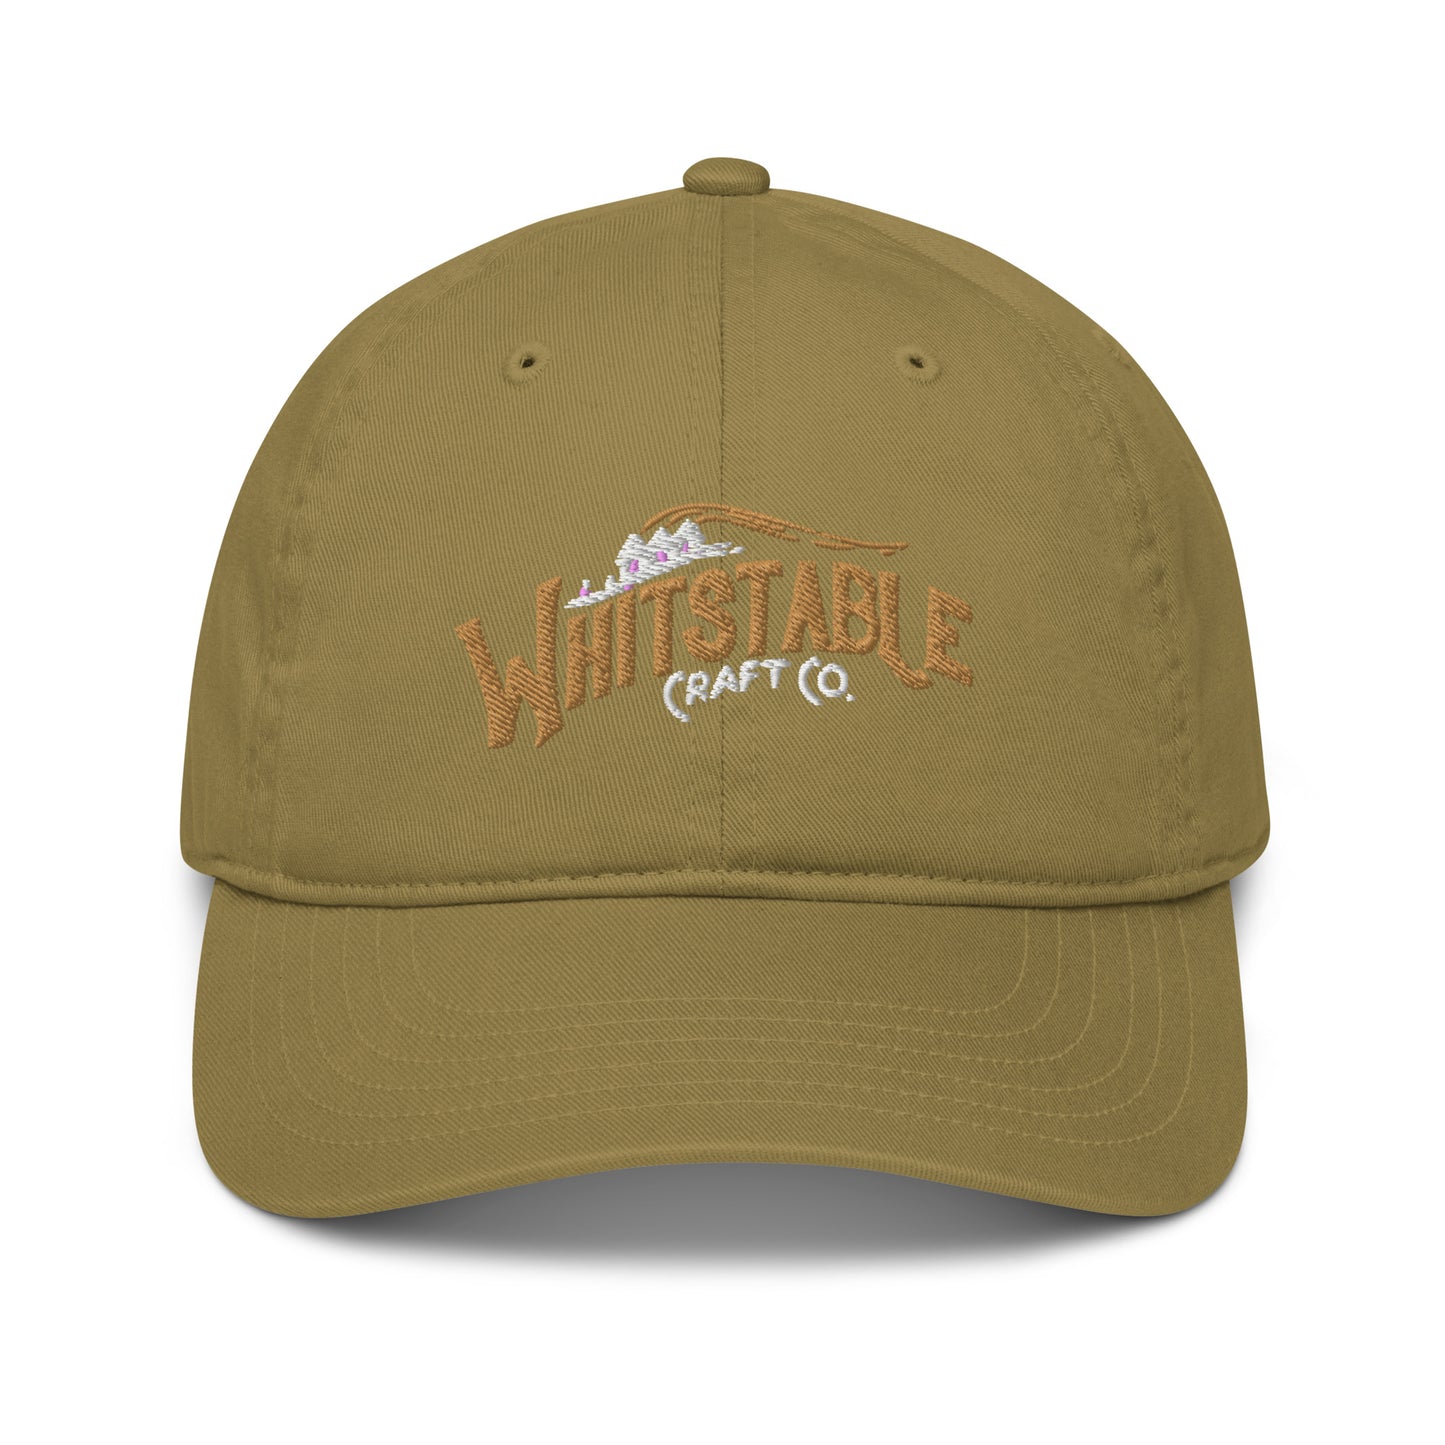 Whitstable Craft Co Dad Hat